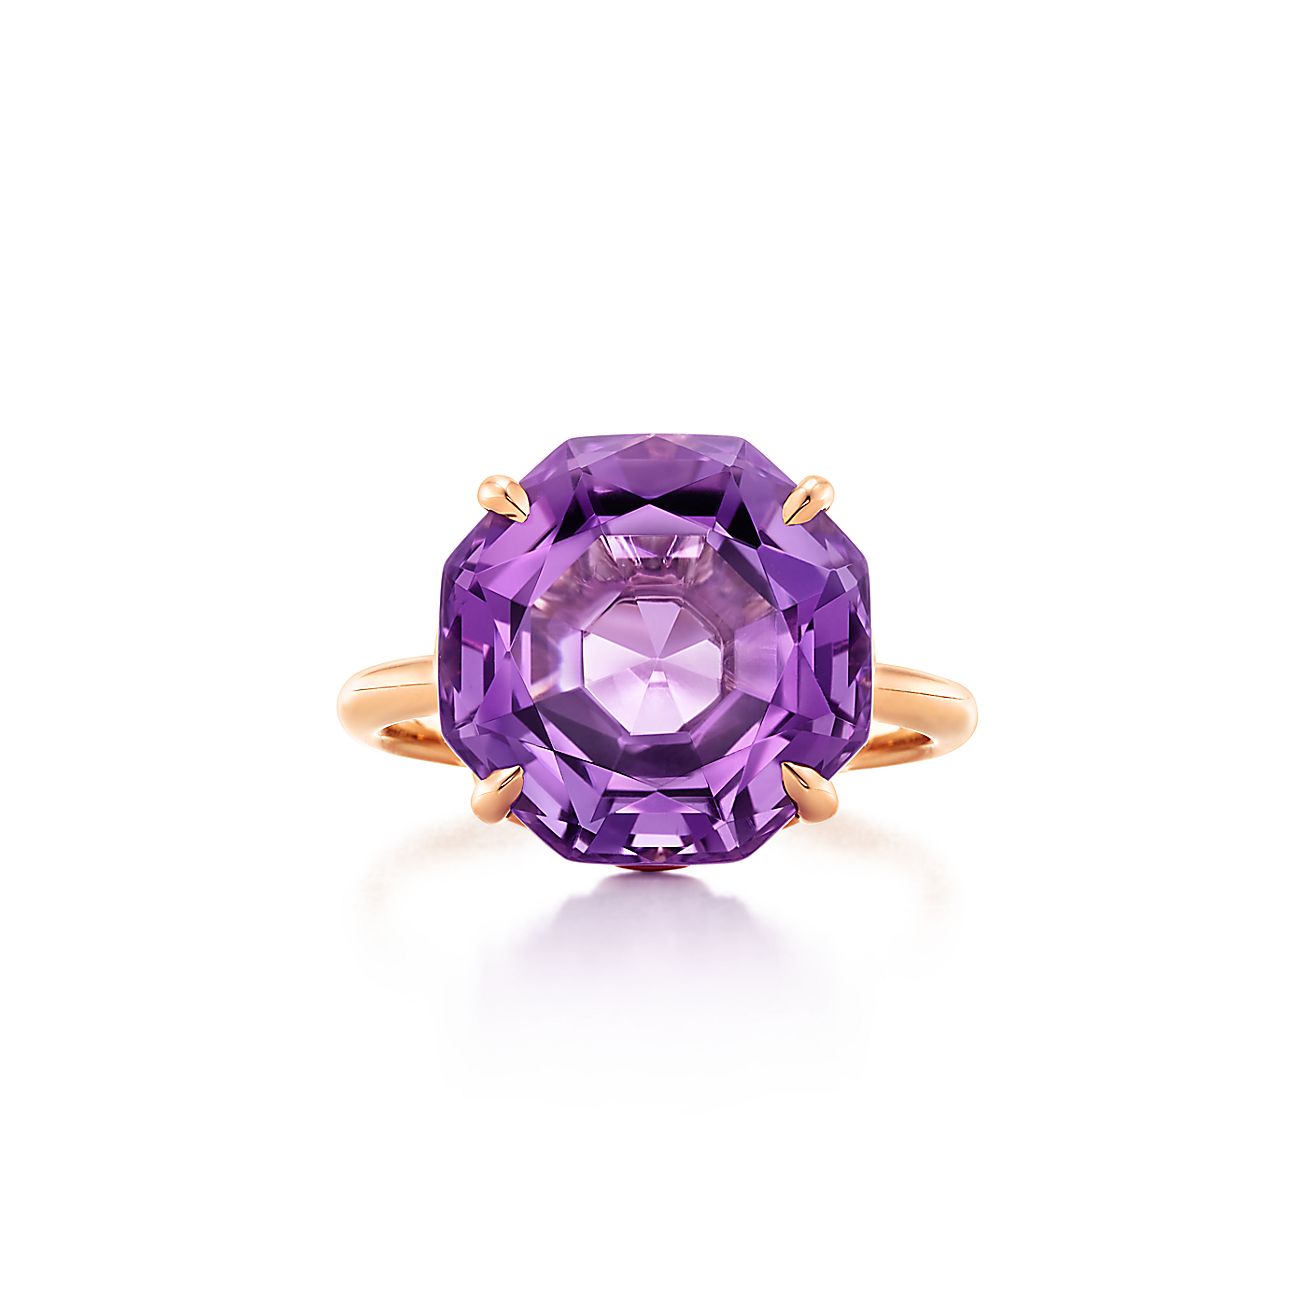 Tifffany Sparklers ring in 18k rose gold with an amethyst. | Tiffany & Co.